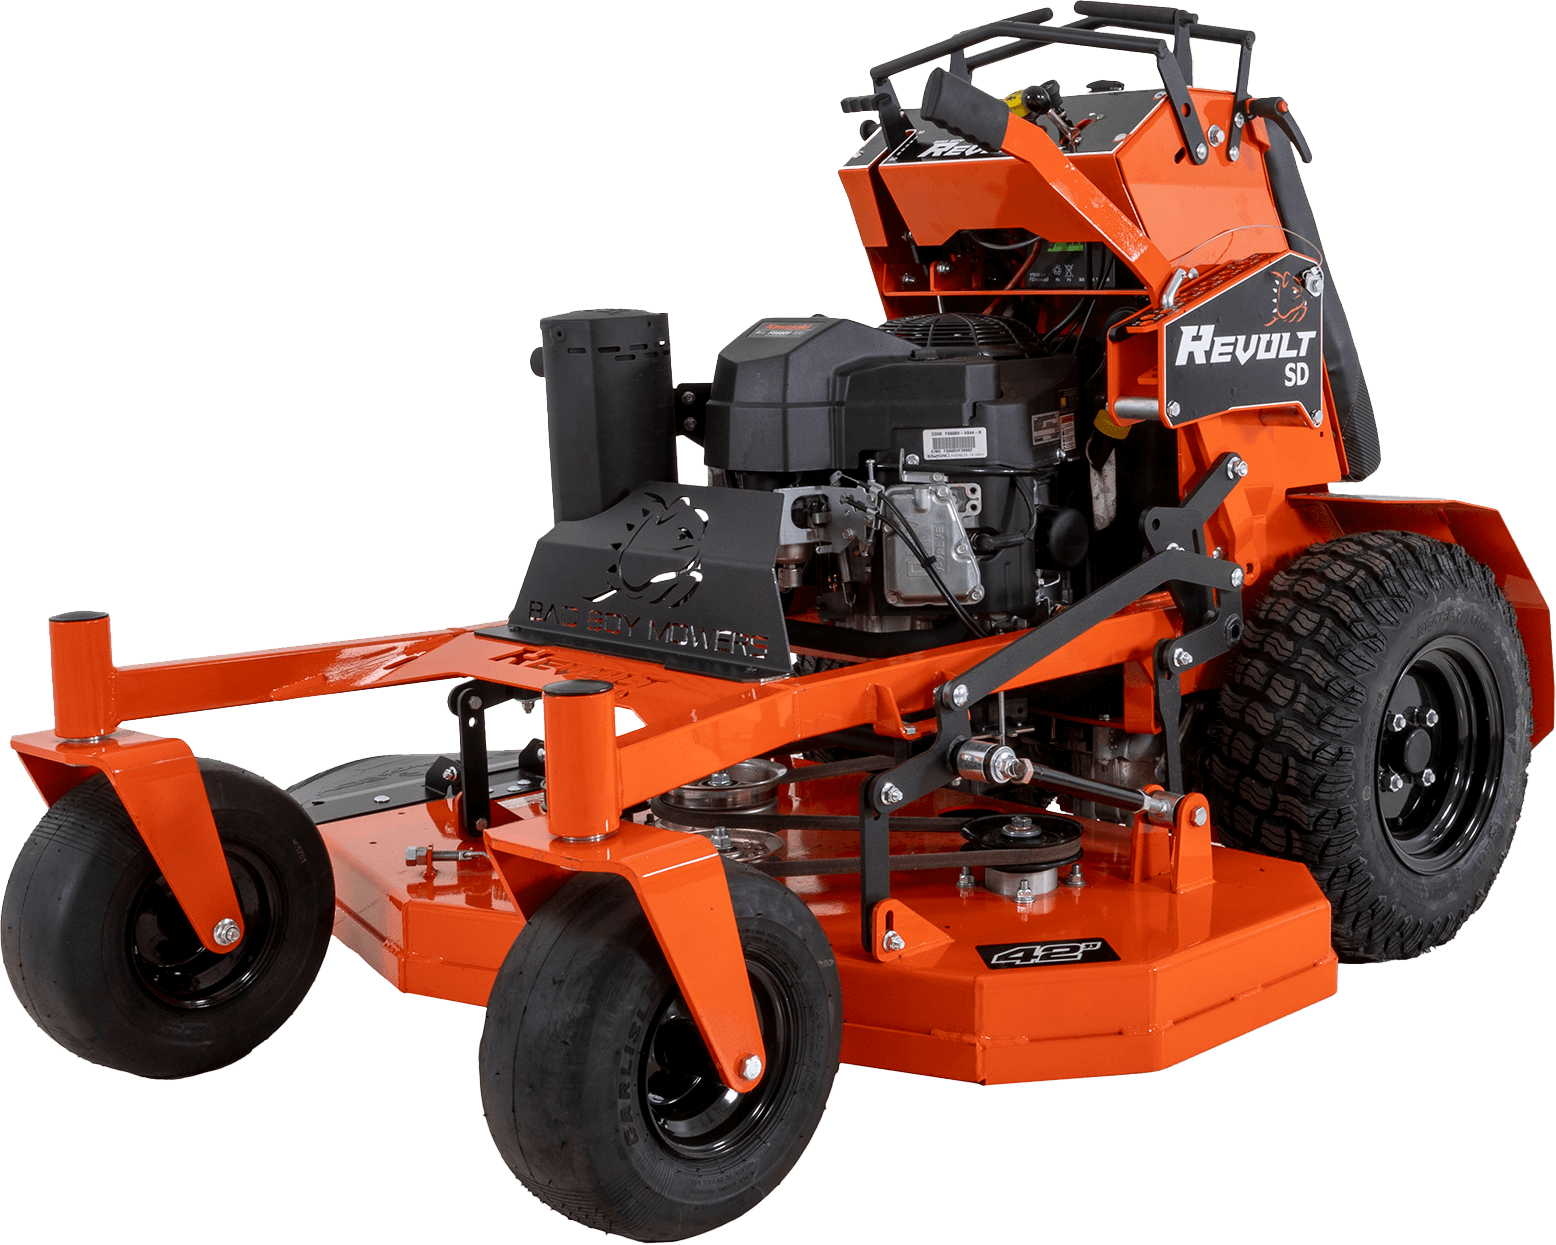 Revolt SD Residential Stand-On Lawn Mower